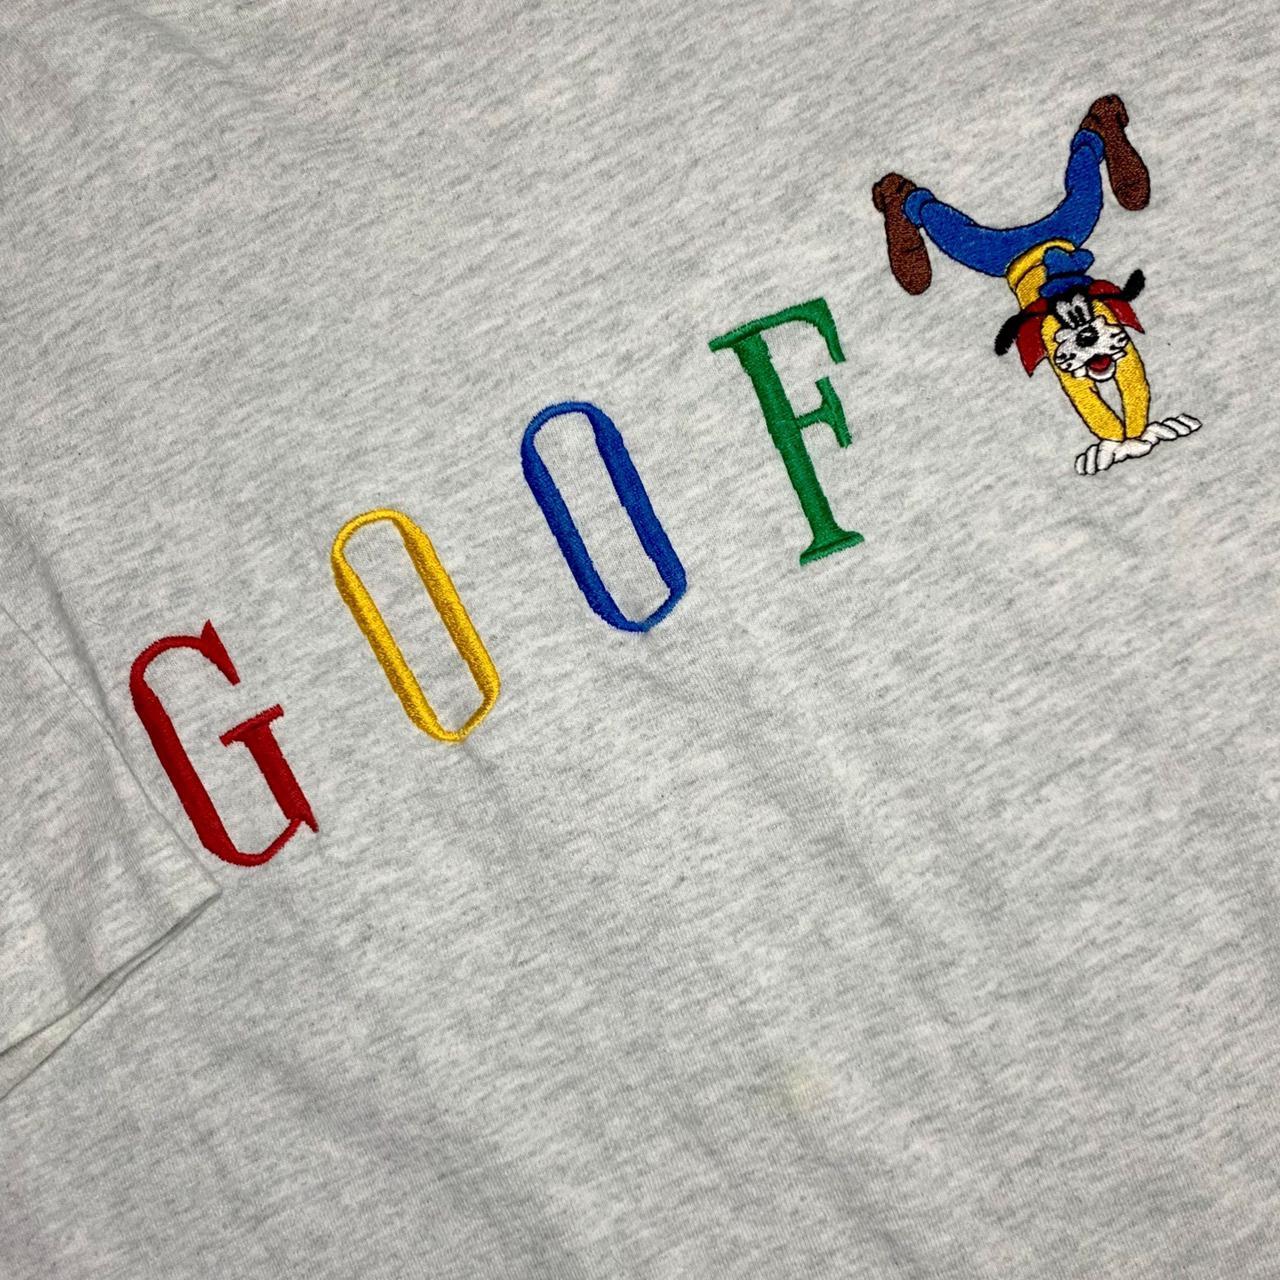 Product Image 3 - Vintage Goofy Shirt

- Great Condition!
-